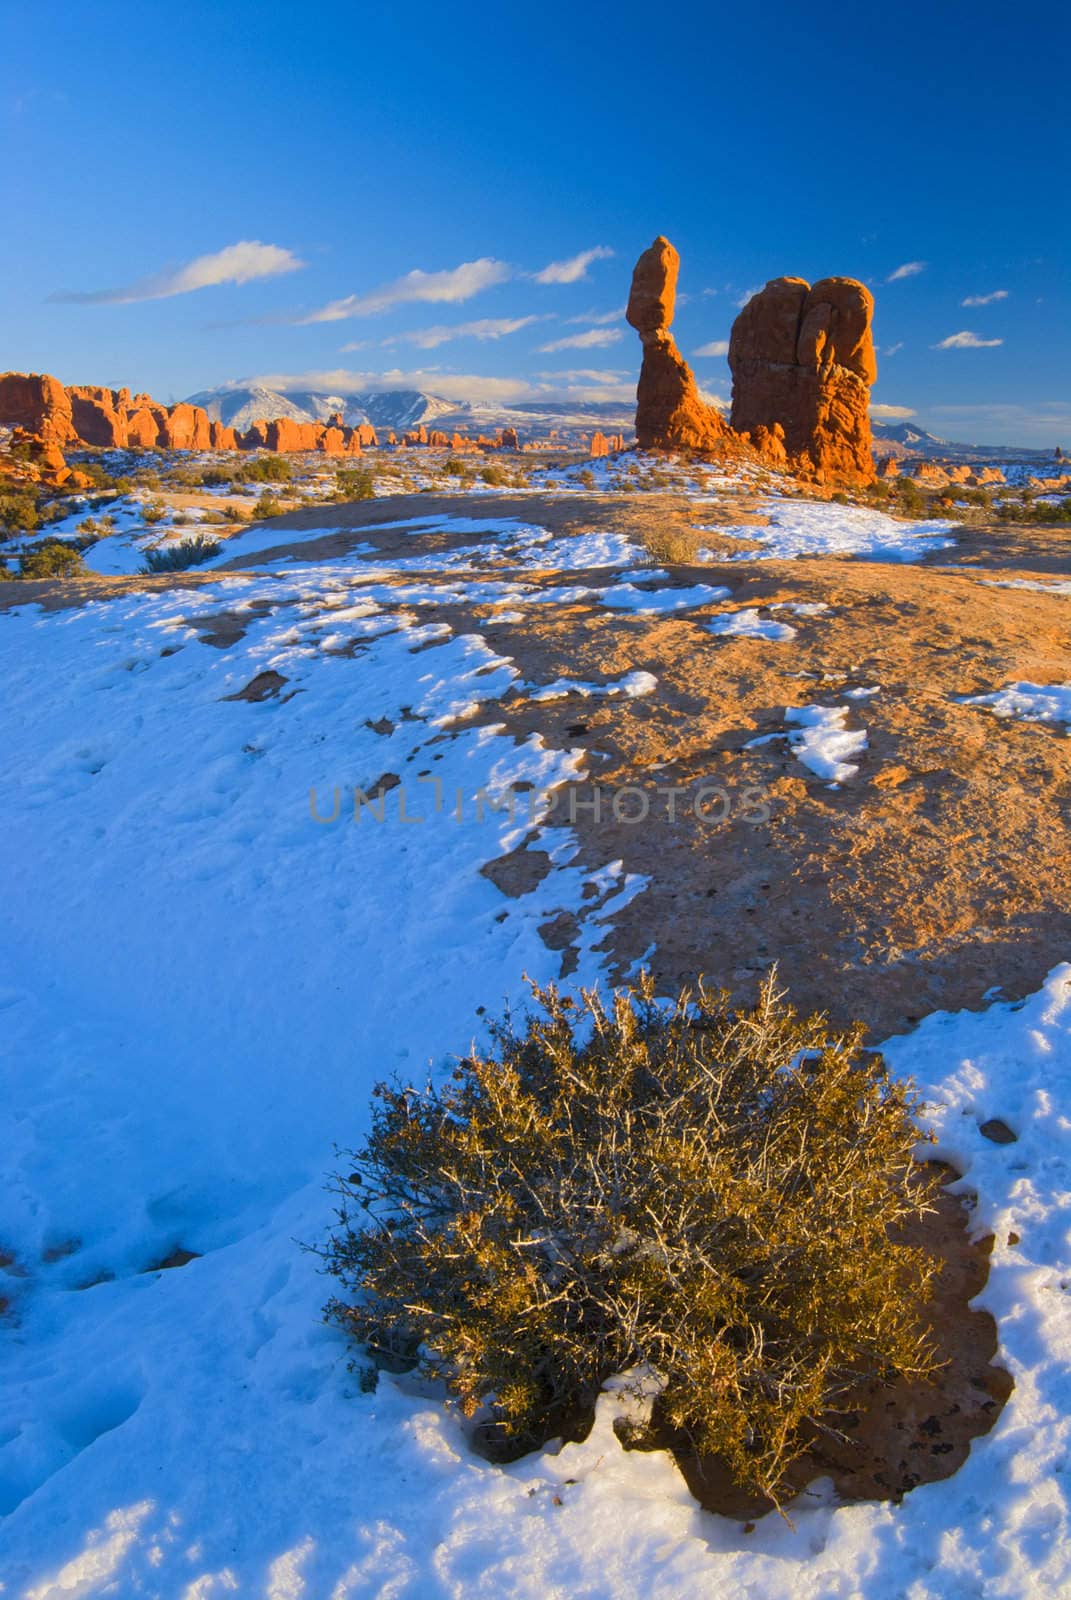 Balanced Rock in winter at sunset, Arches National Park, Grand County, Utah, USA by CharlesBolin